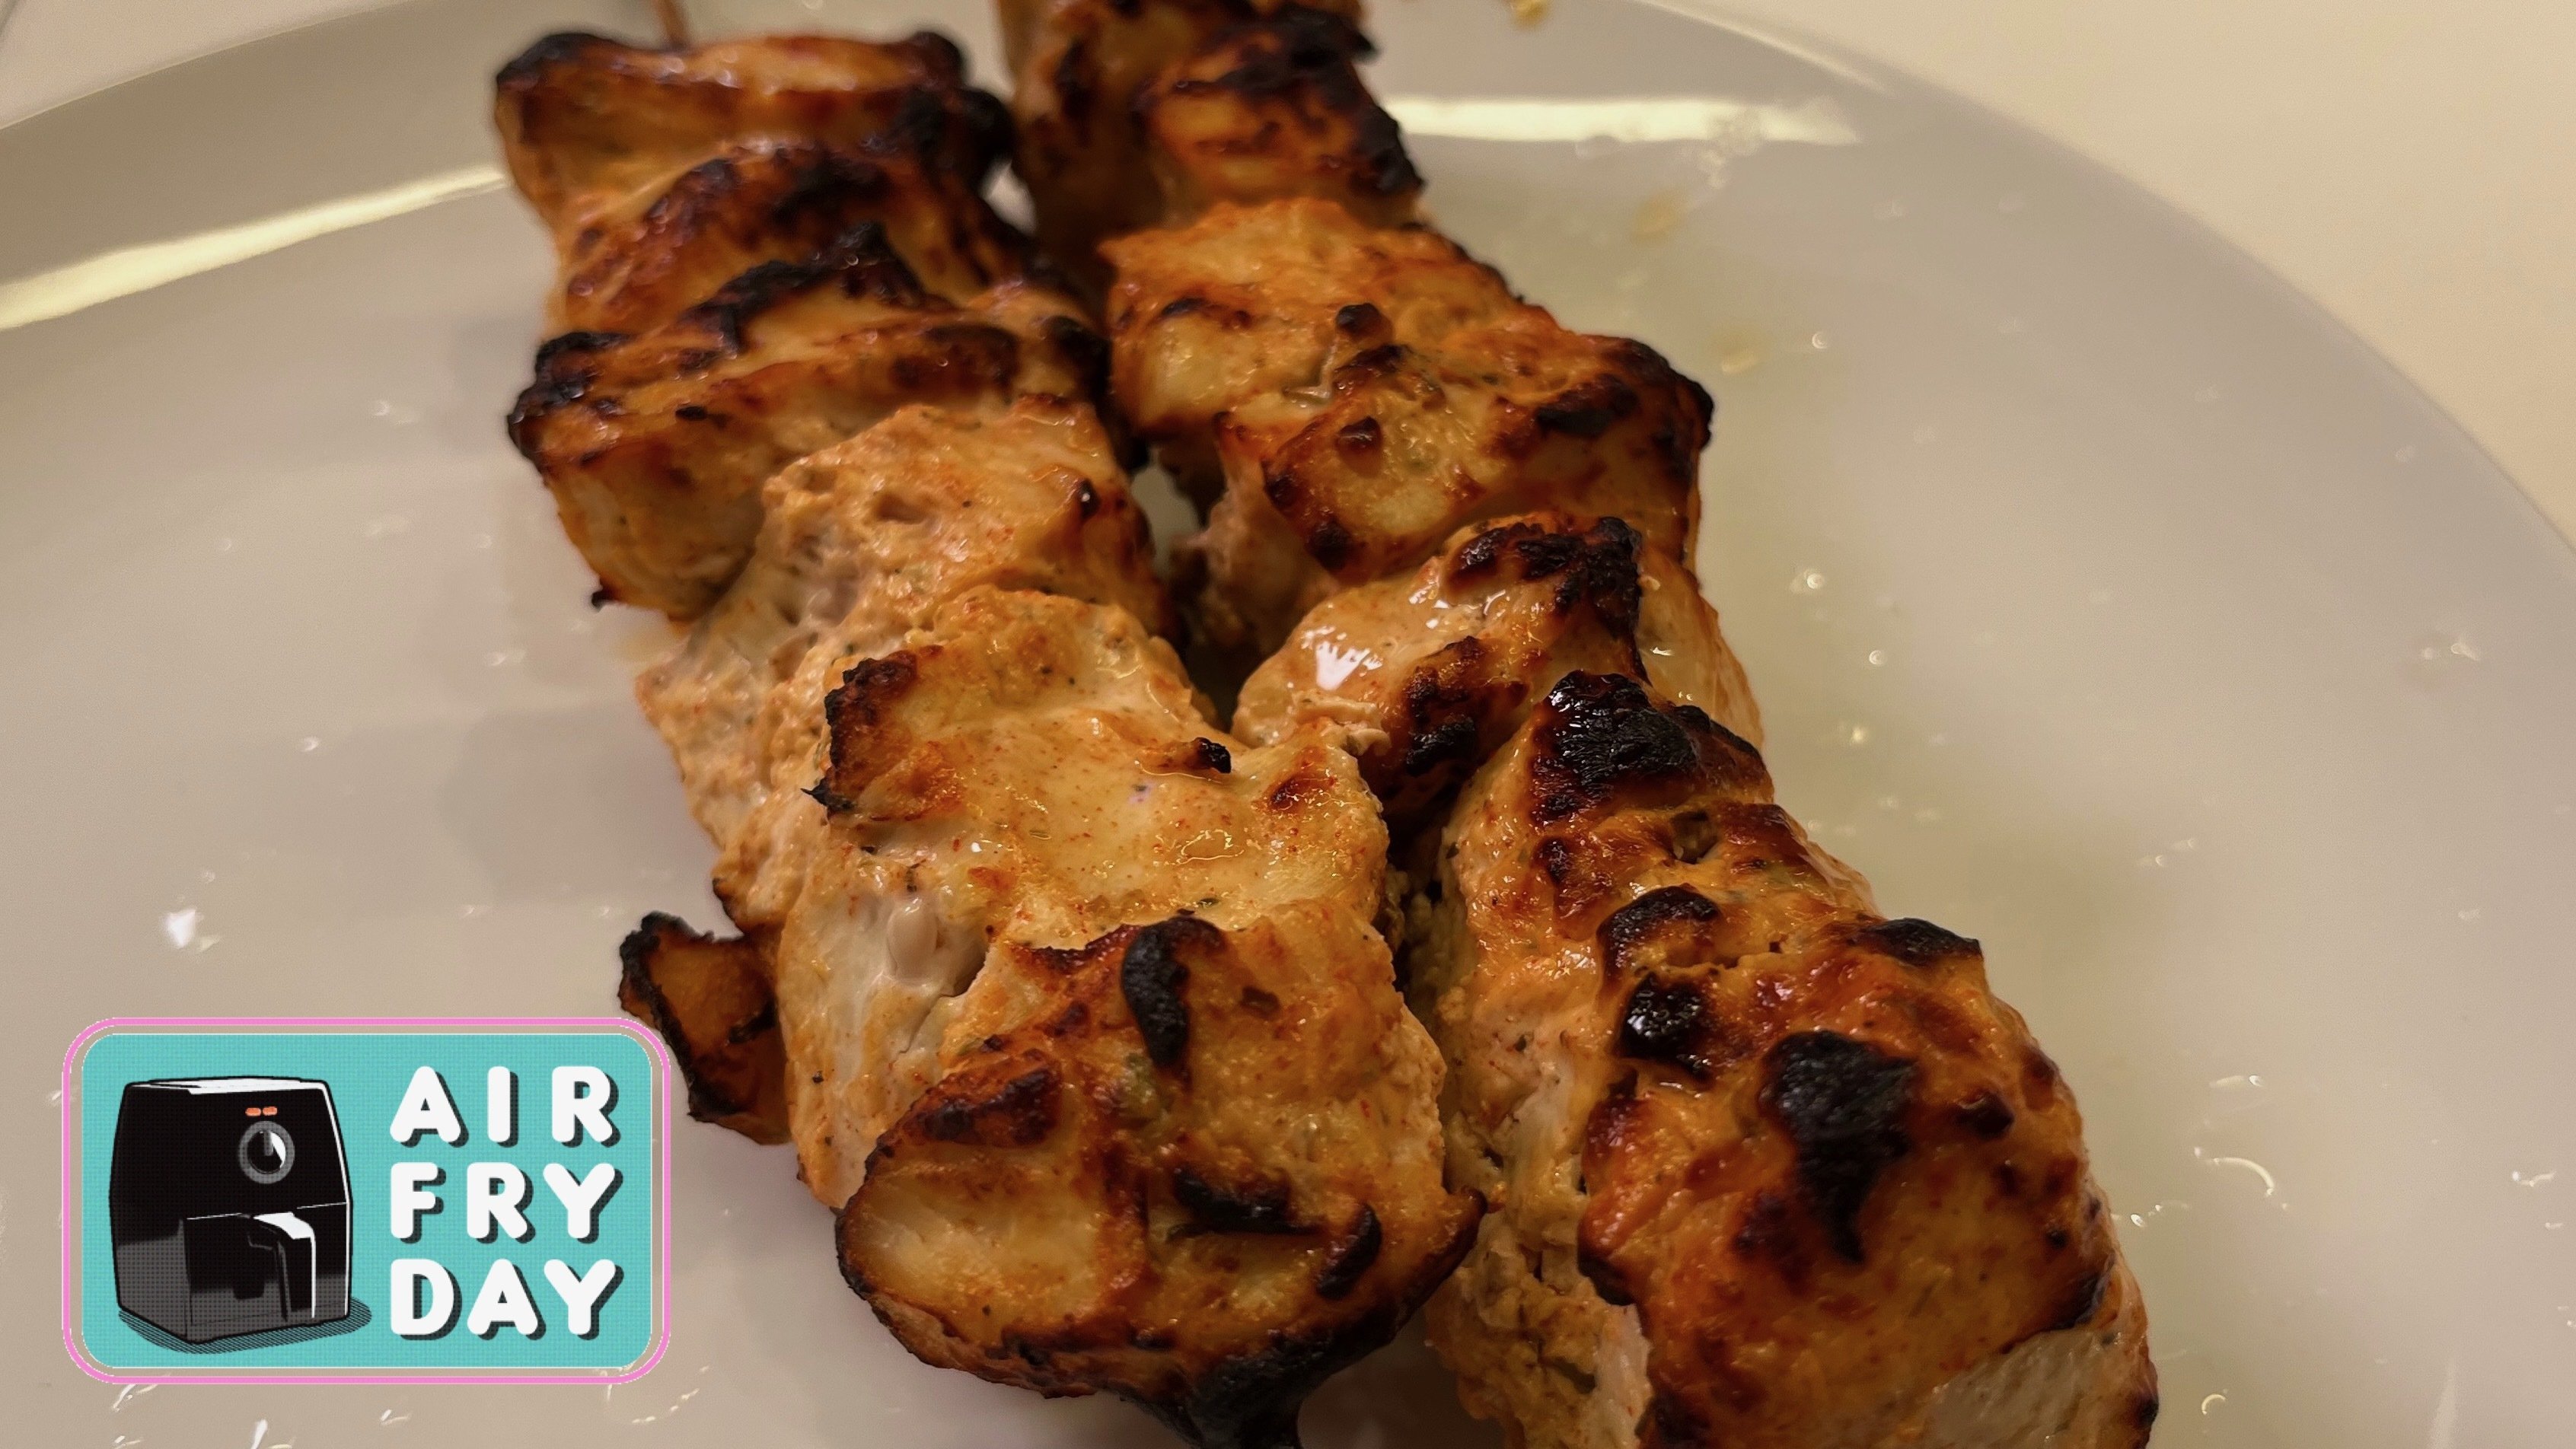 chicken skewers on plate with airfryday logo